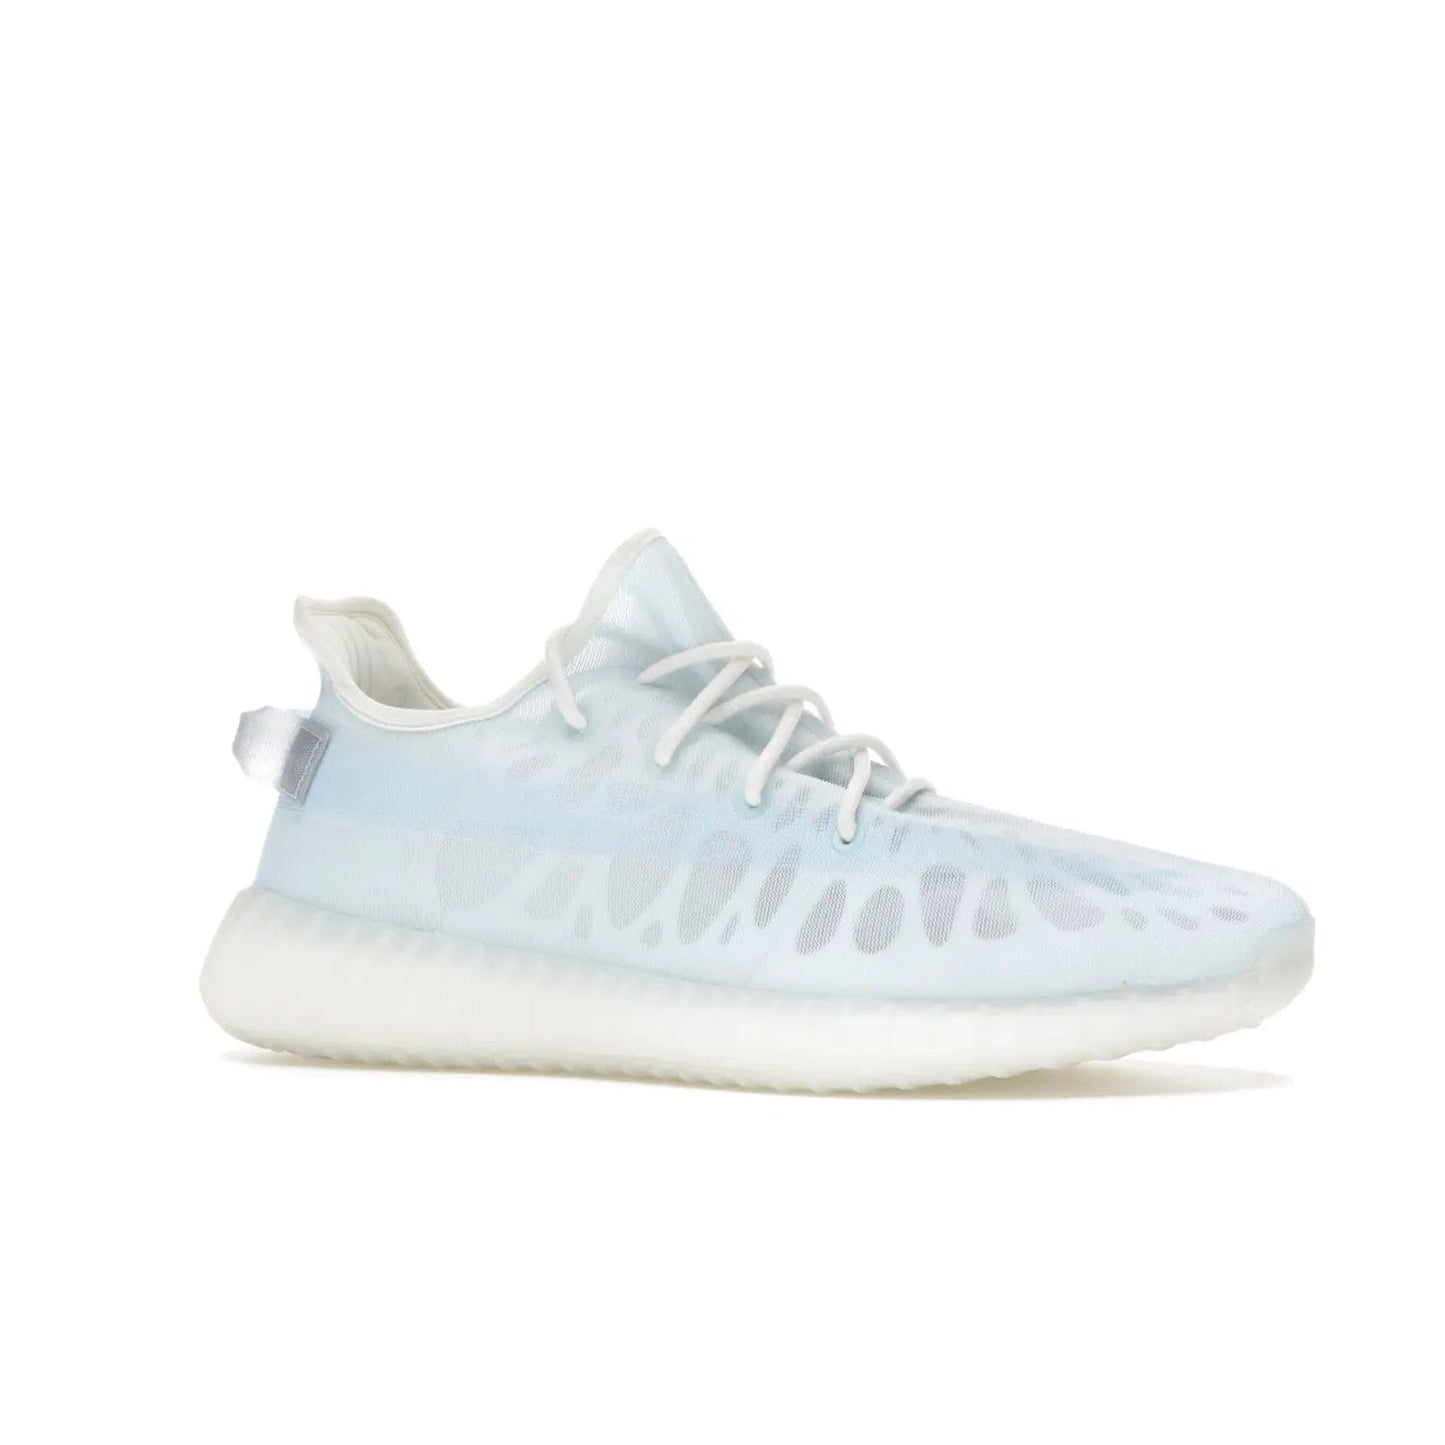 adidas Yeezy Boost 350 V2 Mono Ice - Image 3 - Only at www.BallersClubKickz.com - Introducing the adidas Yeezy 350 V2 Mono Ice - a sleek monofilament mesh design in Ice blue with Boost sole and heel pull tab. Released exclusively in the US for $220.